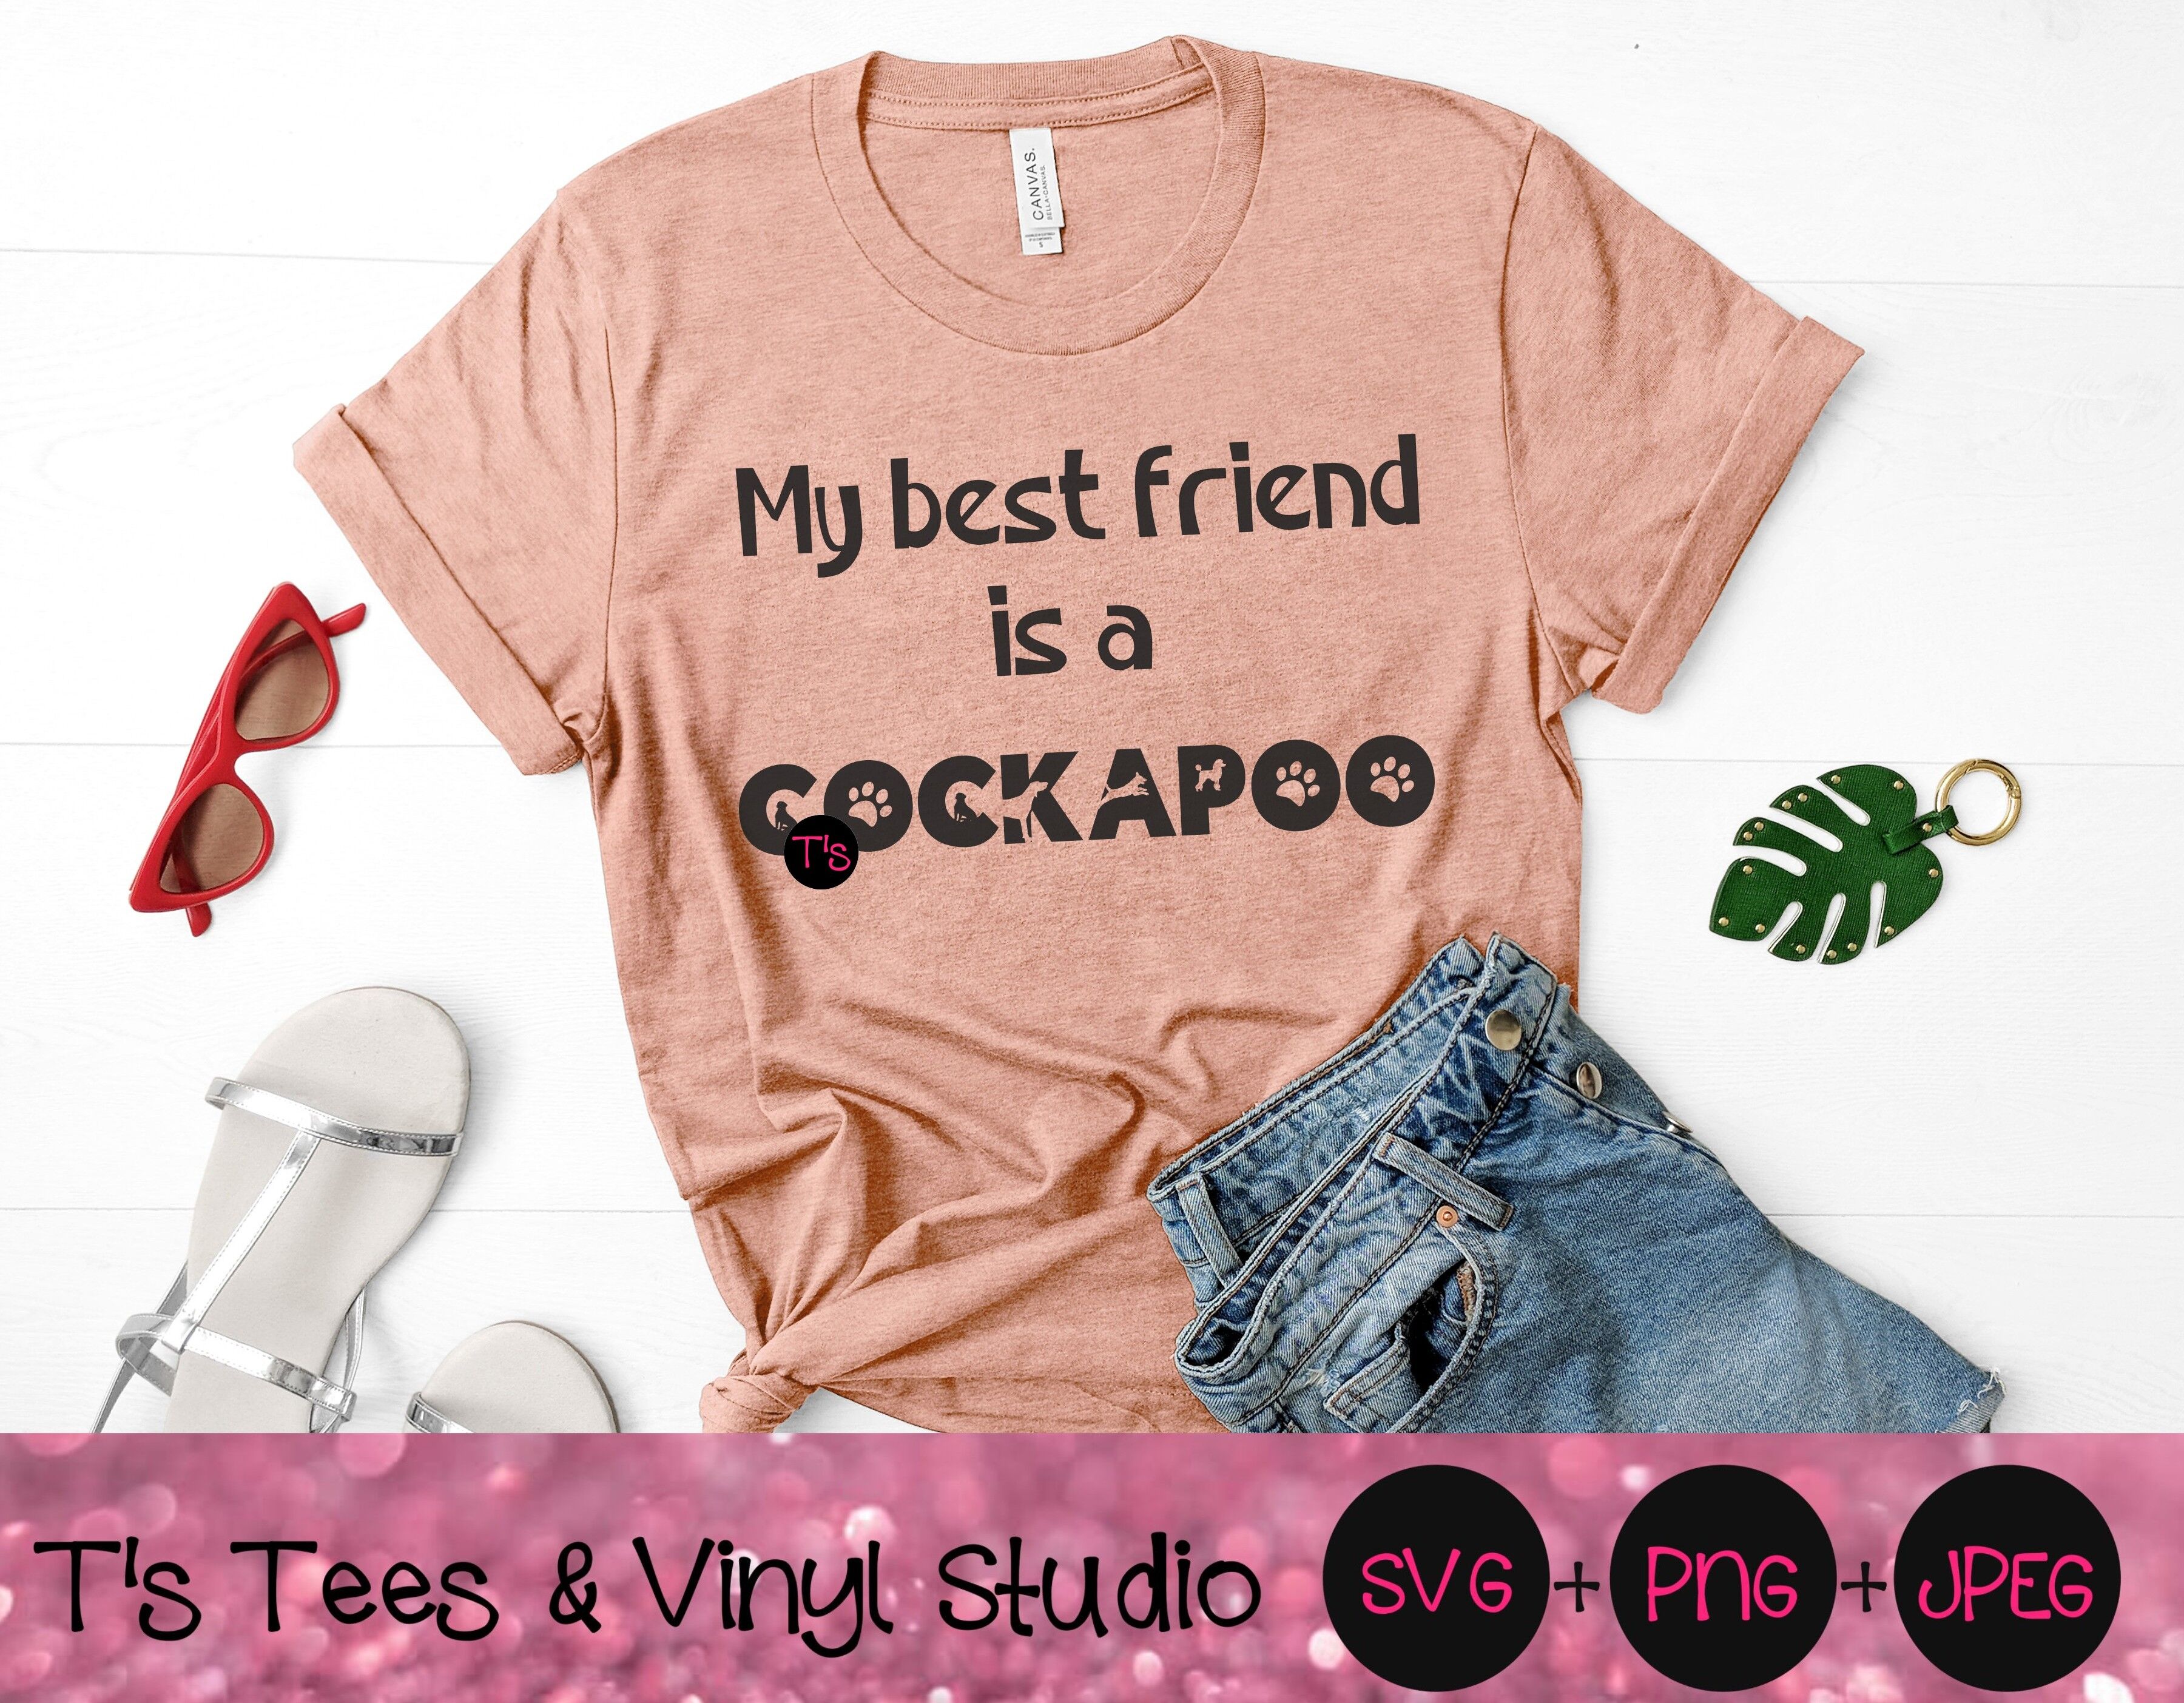 My Best Friend Is A Cockapoo Svg Cockapoo Svg Dog Svg Cockapoo Png By T S Tees Vinyl Studio Thehungryjpeg Com